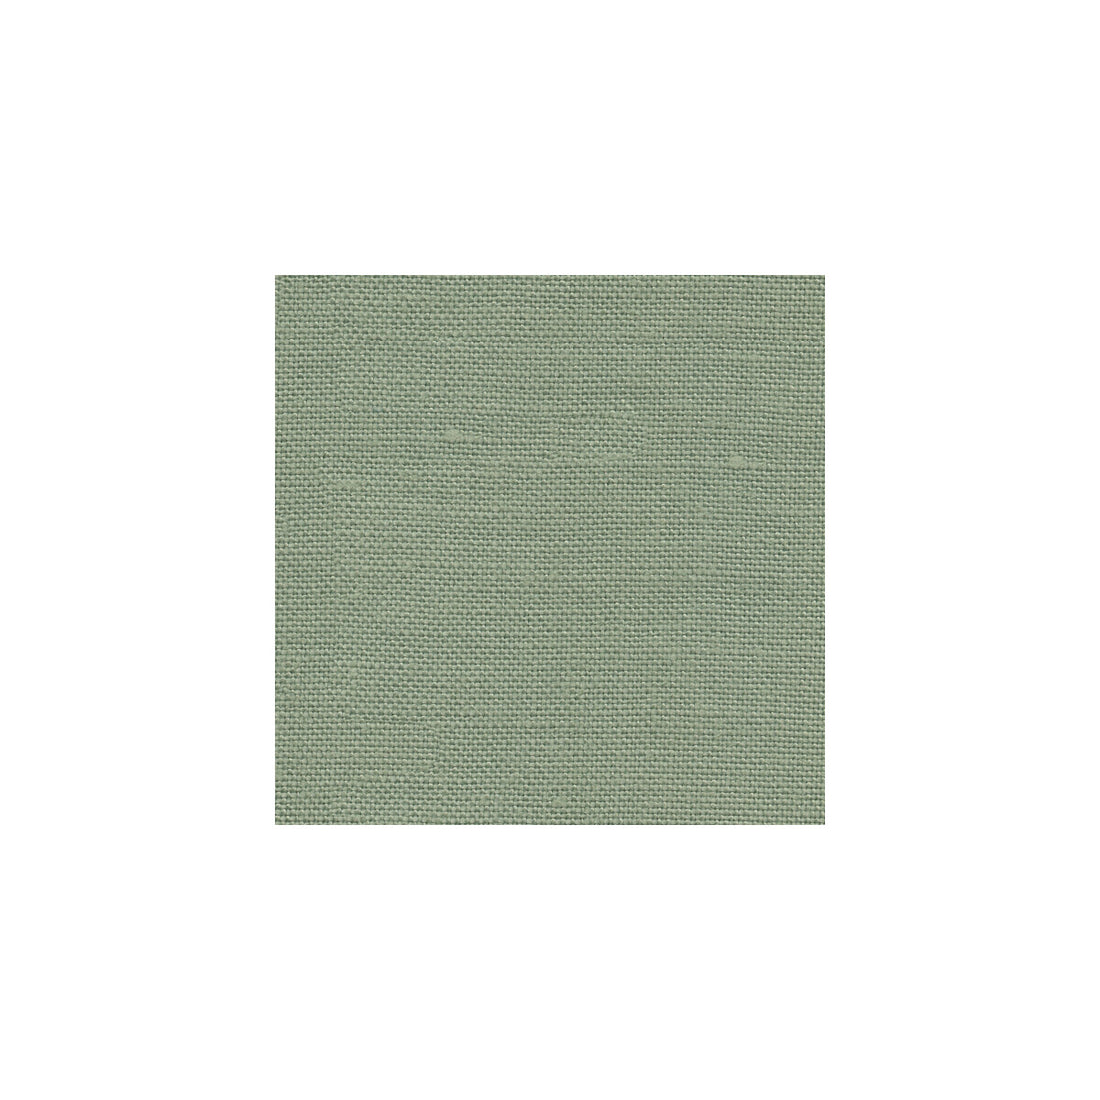 Madison Linen fabric in mint color - pattern 32330.323.0 - by Kravet Design in the Gis collection